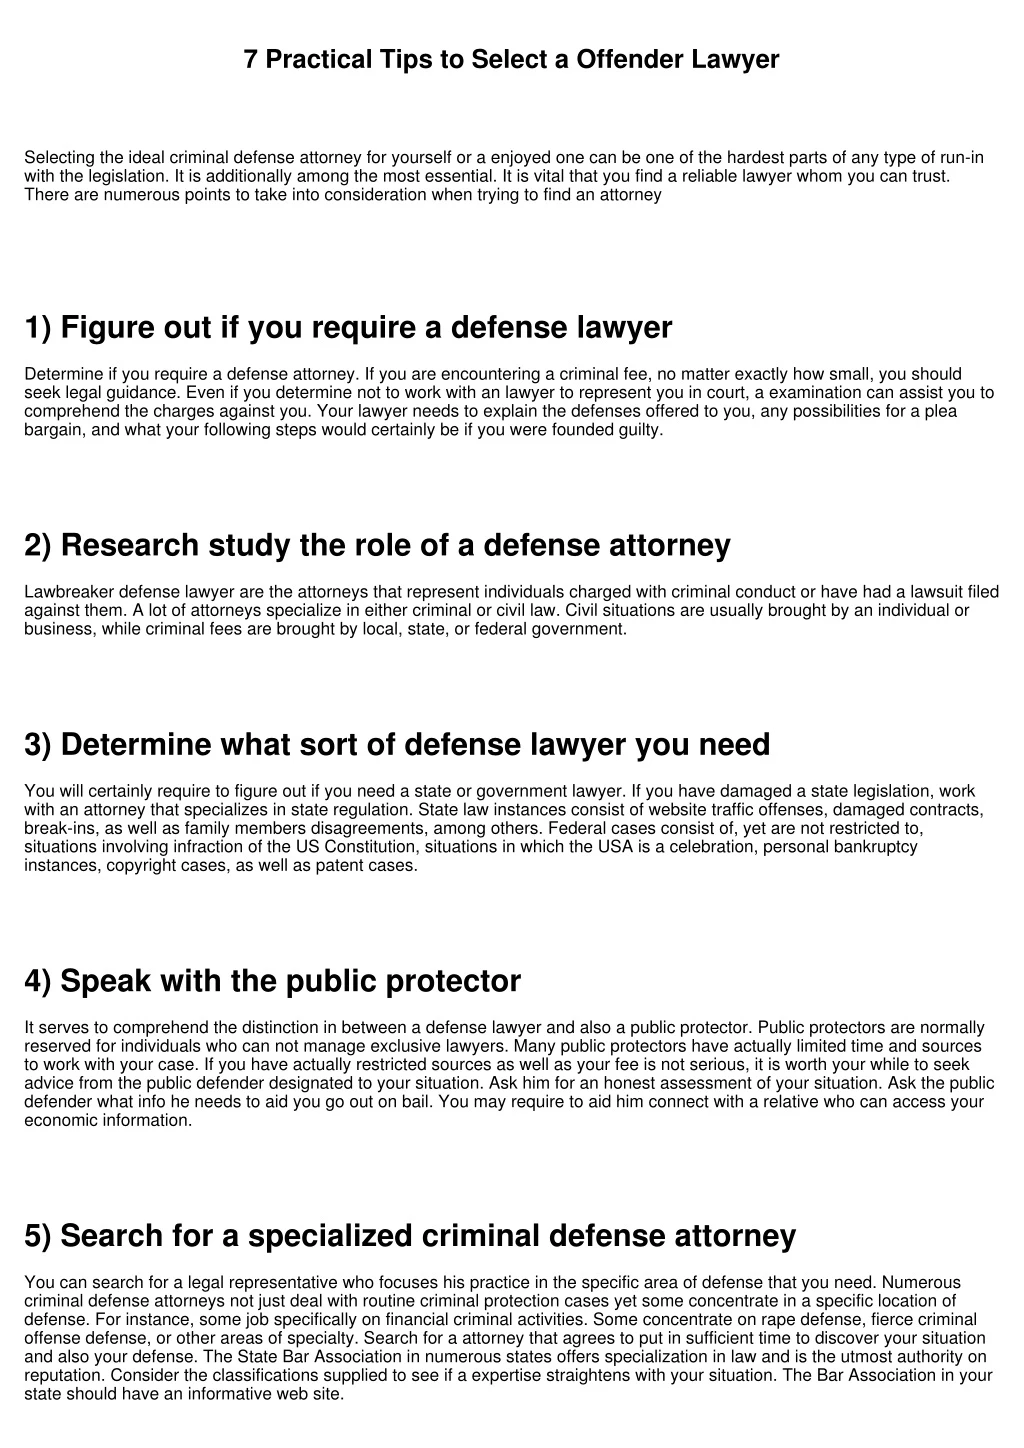 7 practical tips to select a offender lawyer